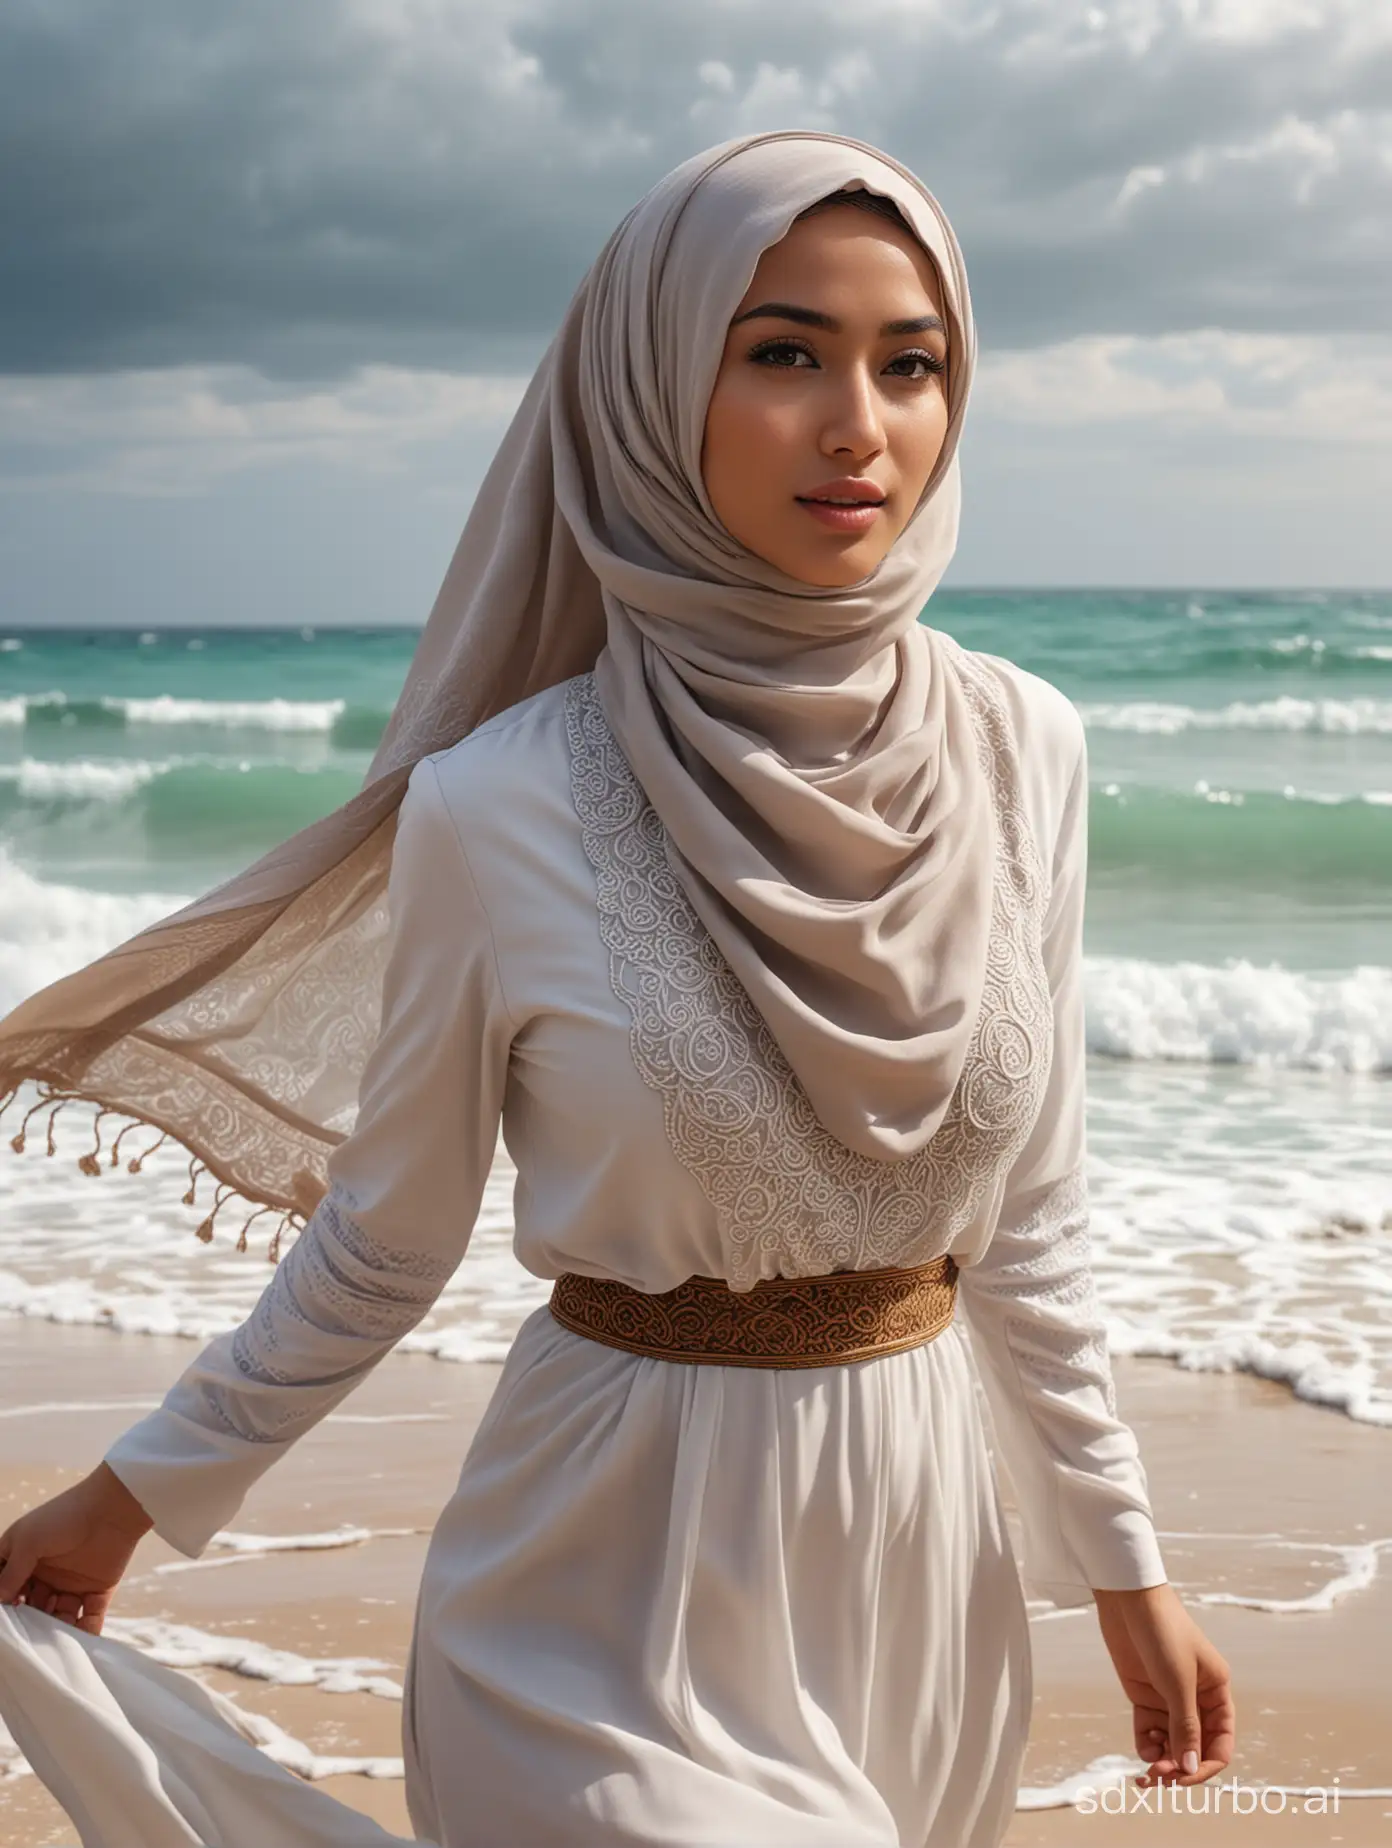 Ultra HD 8k realistic photos. A very beautiful woman with an Indonesian face, wearing a hijab covering her chest, elegant Arabic clothing, walking on the beach with small waves crashing, strong winds, and the atmosphere of the day.